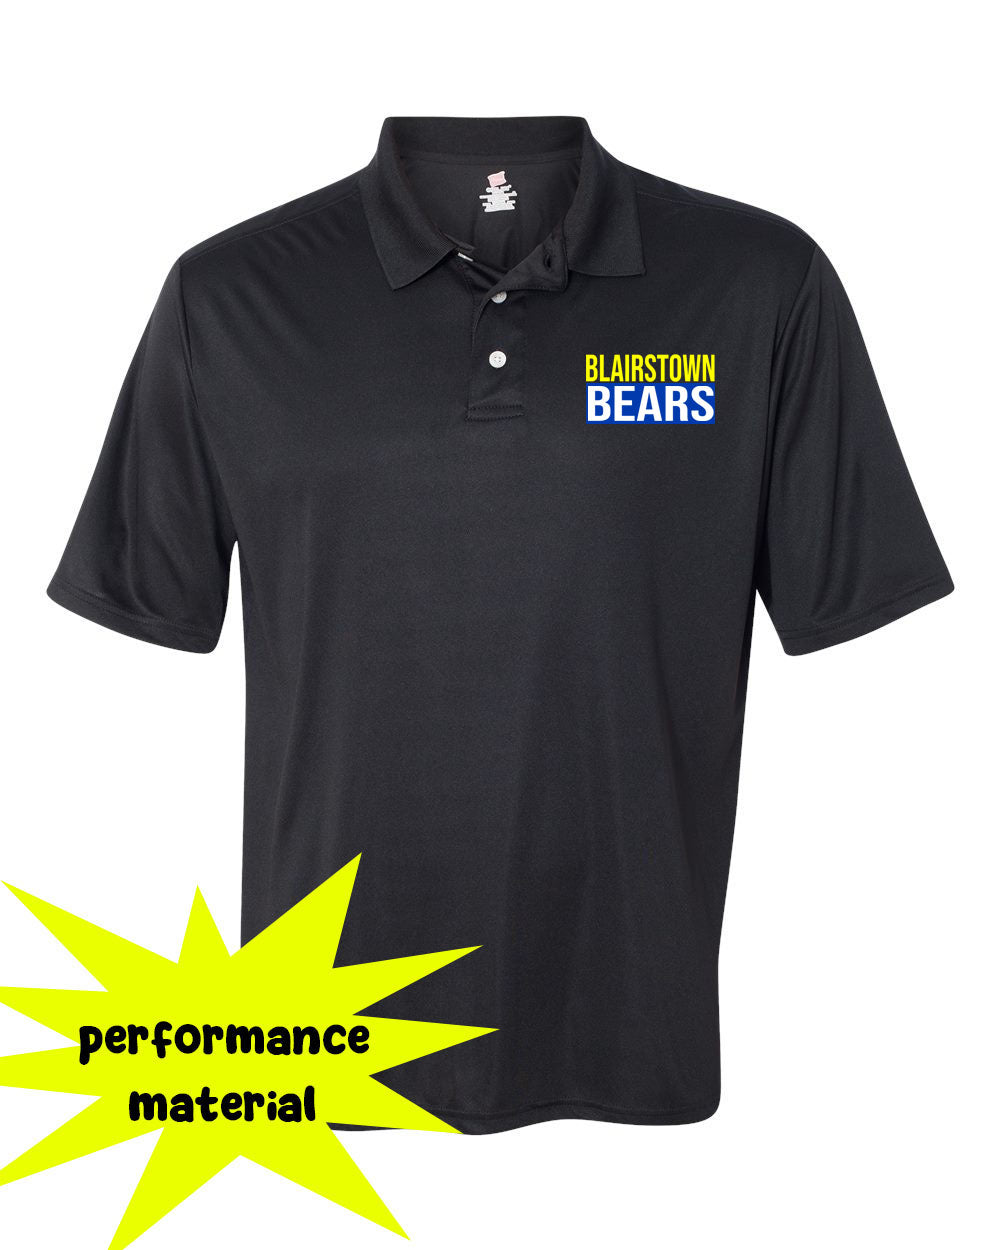 Blairstown Bears Performance Material Polo T-Shirt Design 12